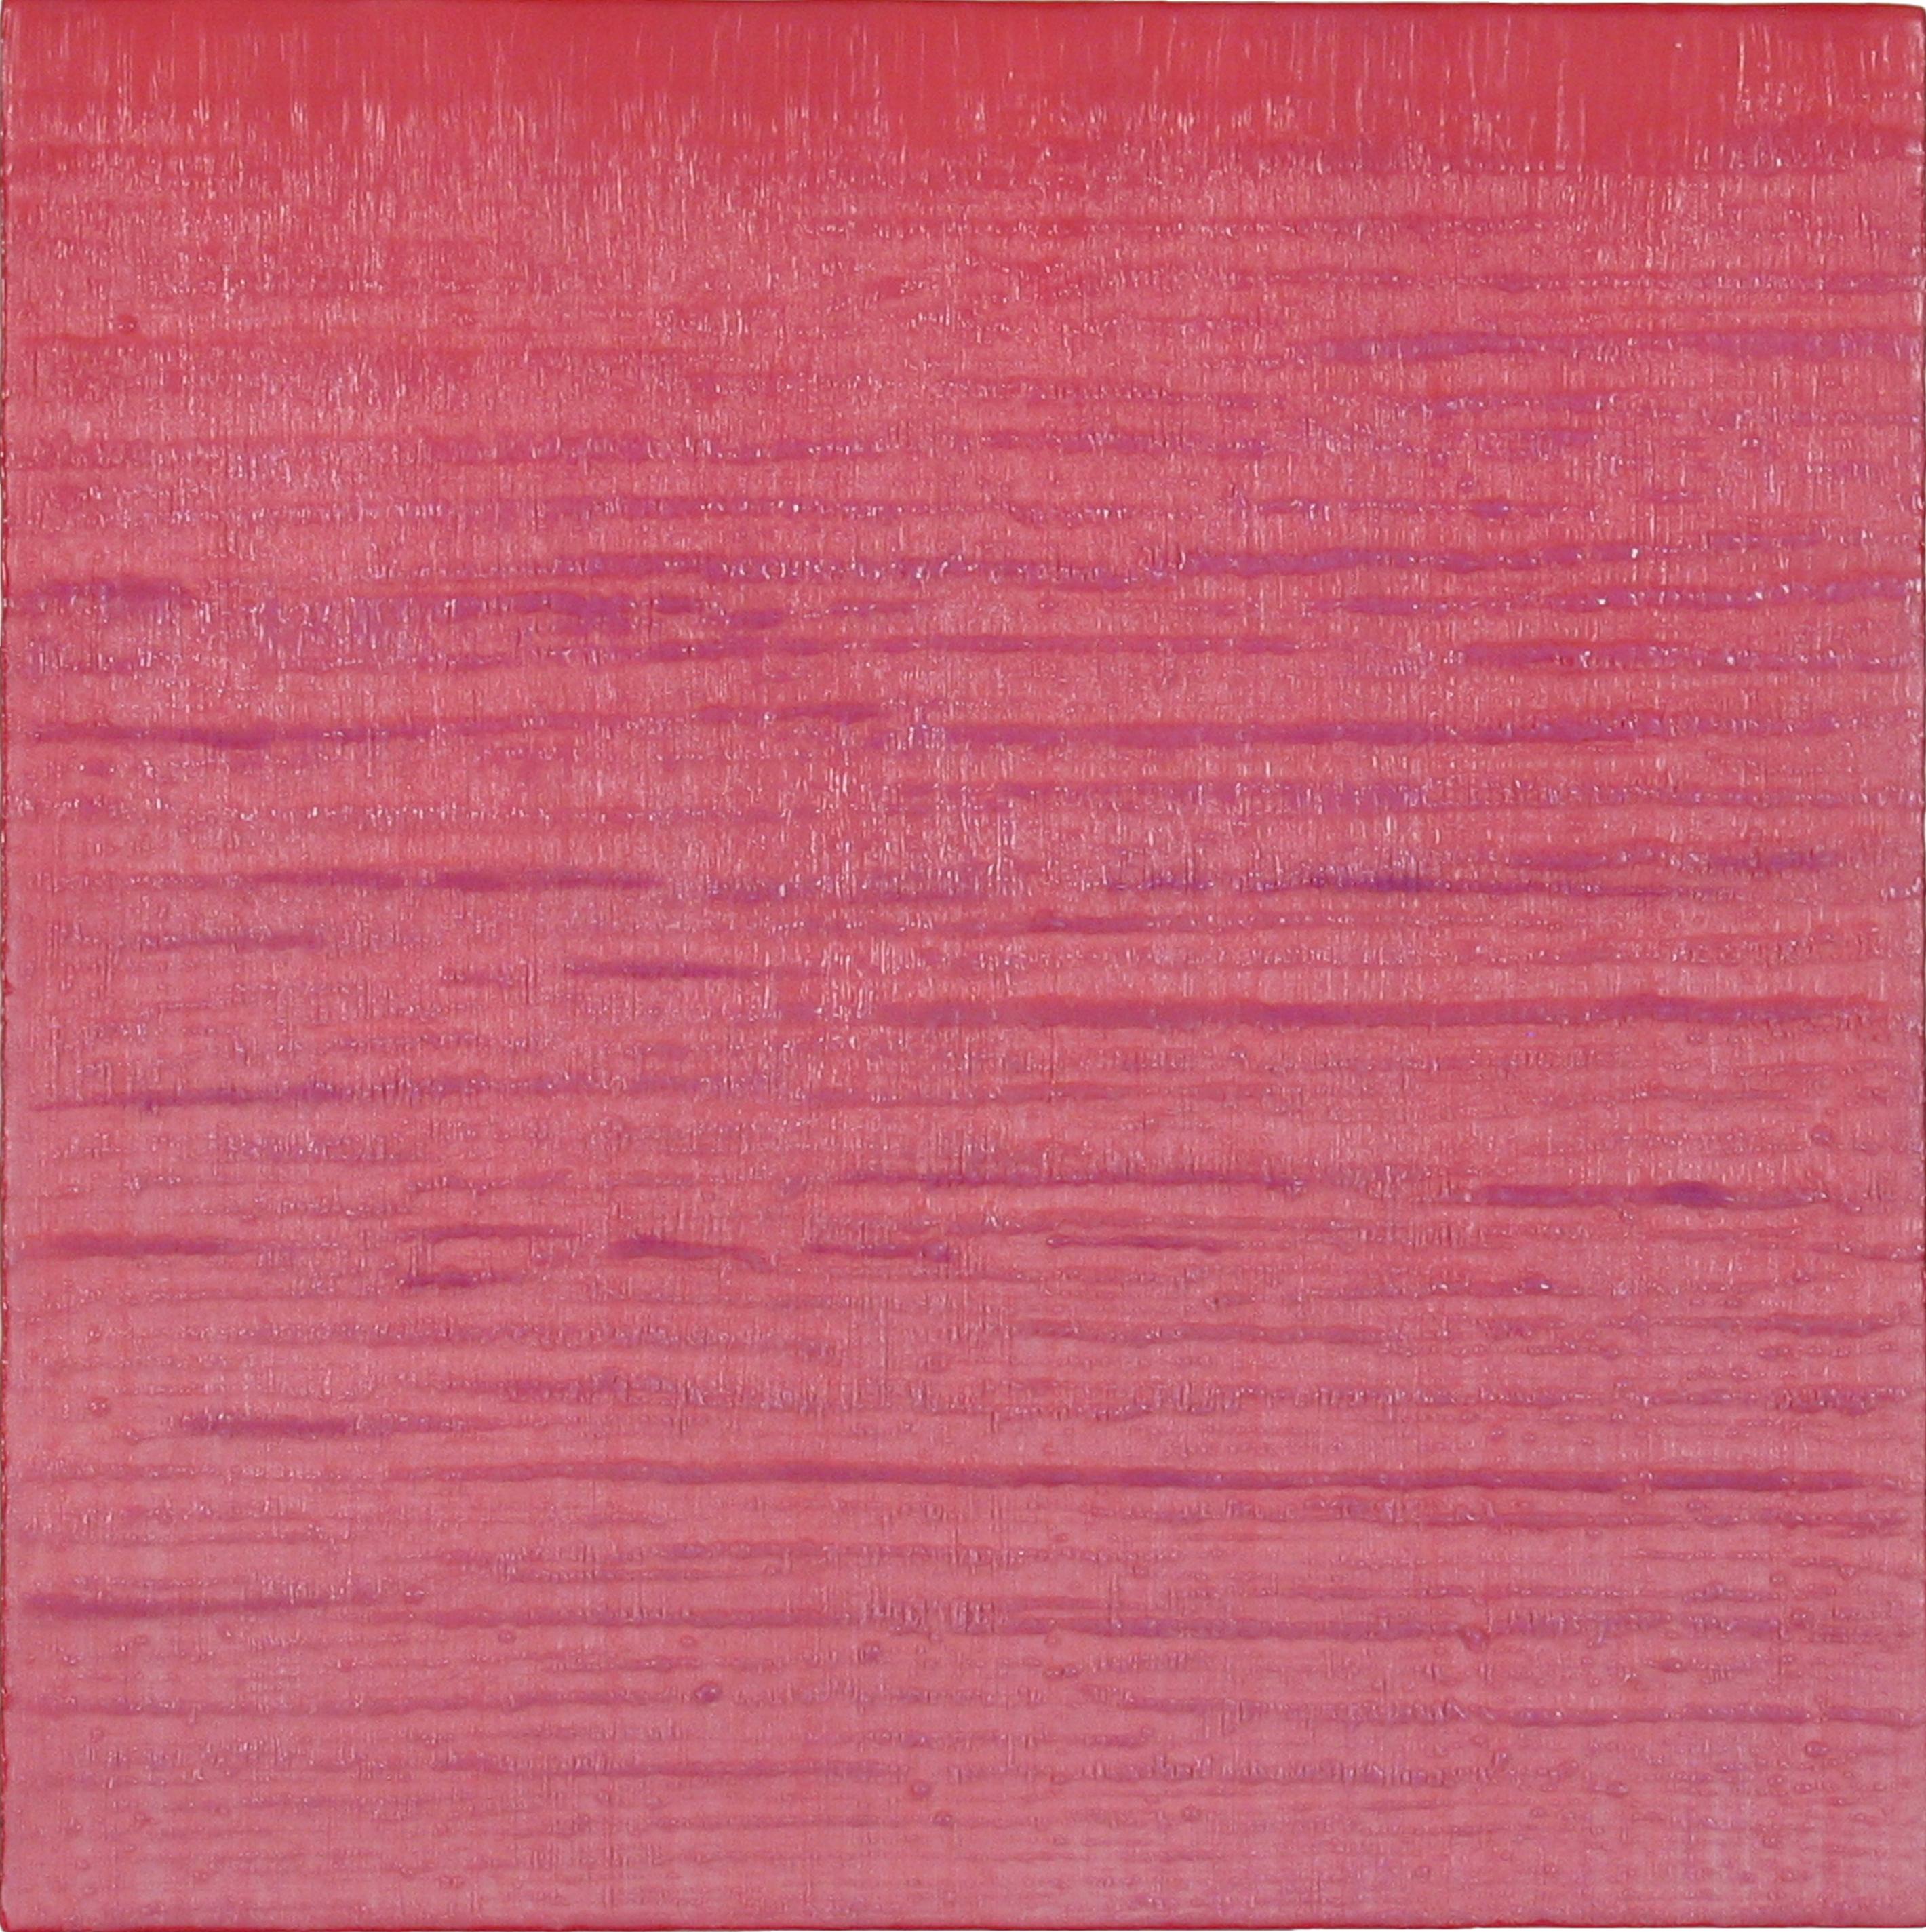 Silk Road 192, Bright Pink Encaustic Colorful Square Small Painting Color Grid